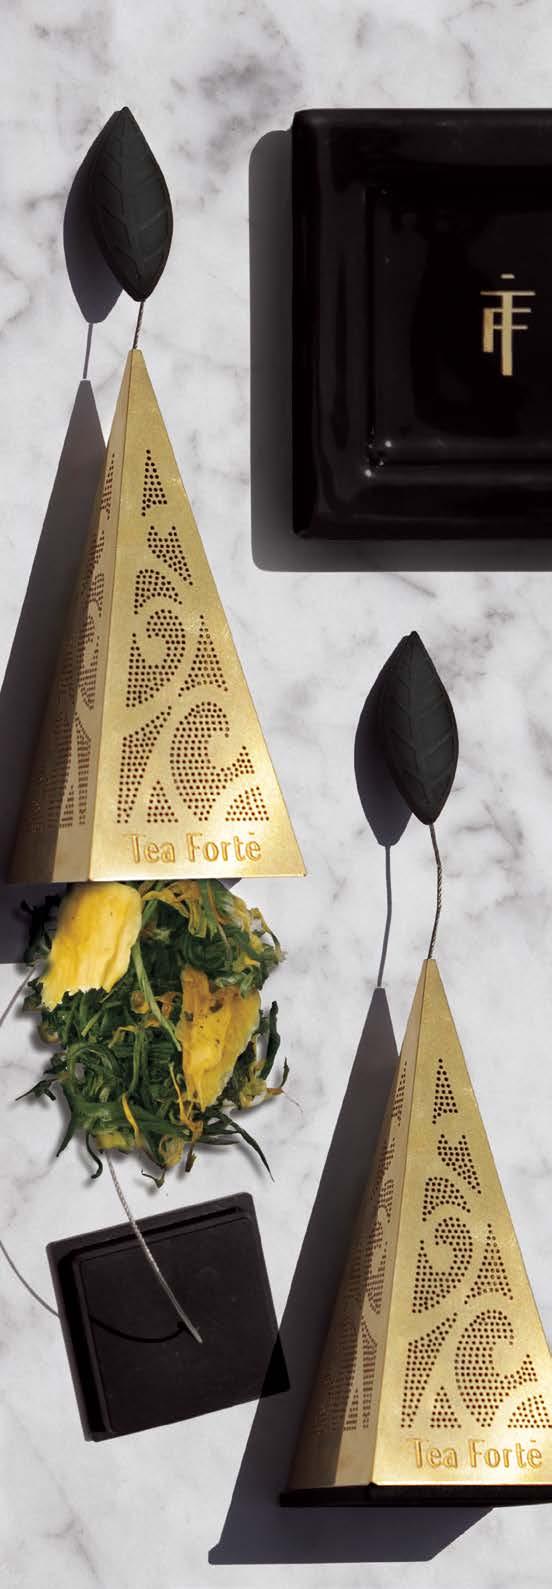 icon au Our signature pyramid-shaped ICON Au gold infuser is the ultimate way to steep loose tea